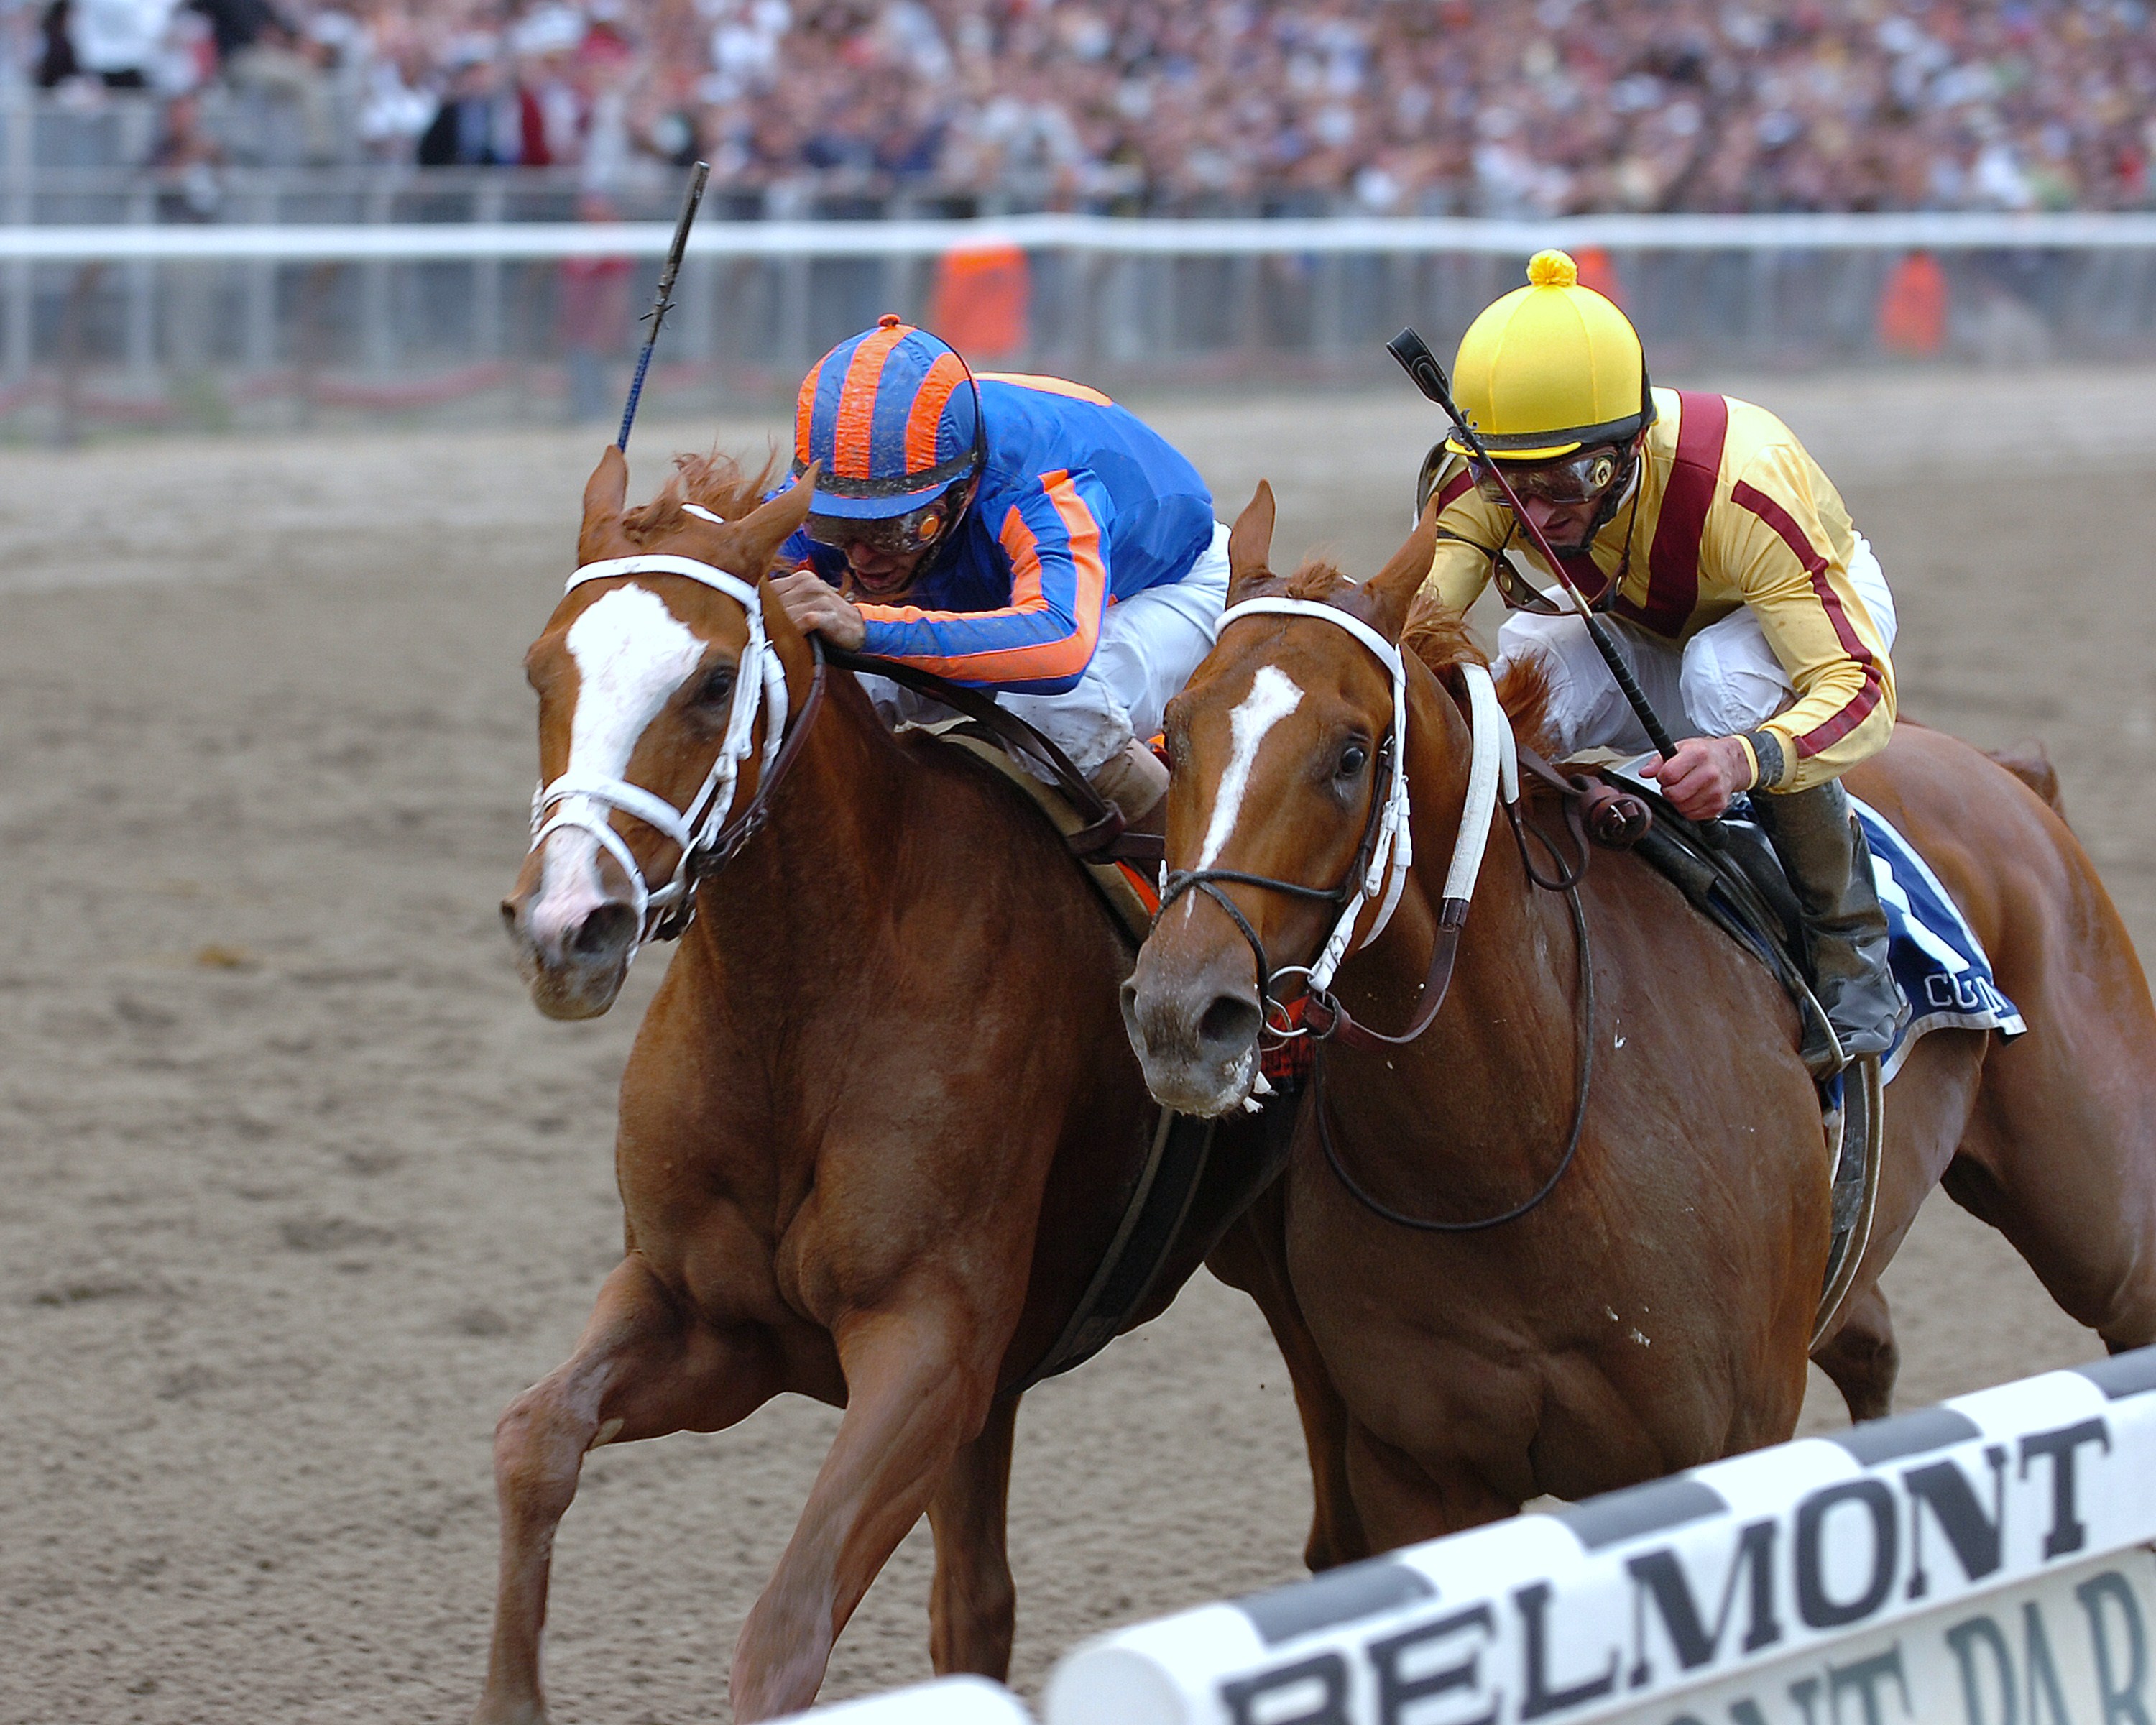 Rags to Riches, left, with John Velazquez up, defeats Curlin to win the 2007 Belmont Stakes (NYRA)